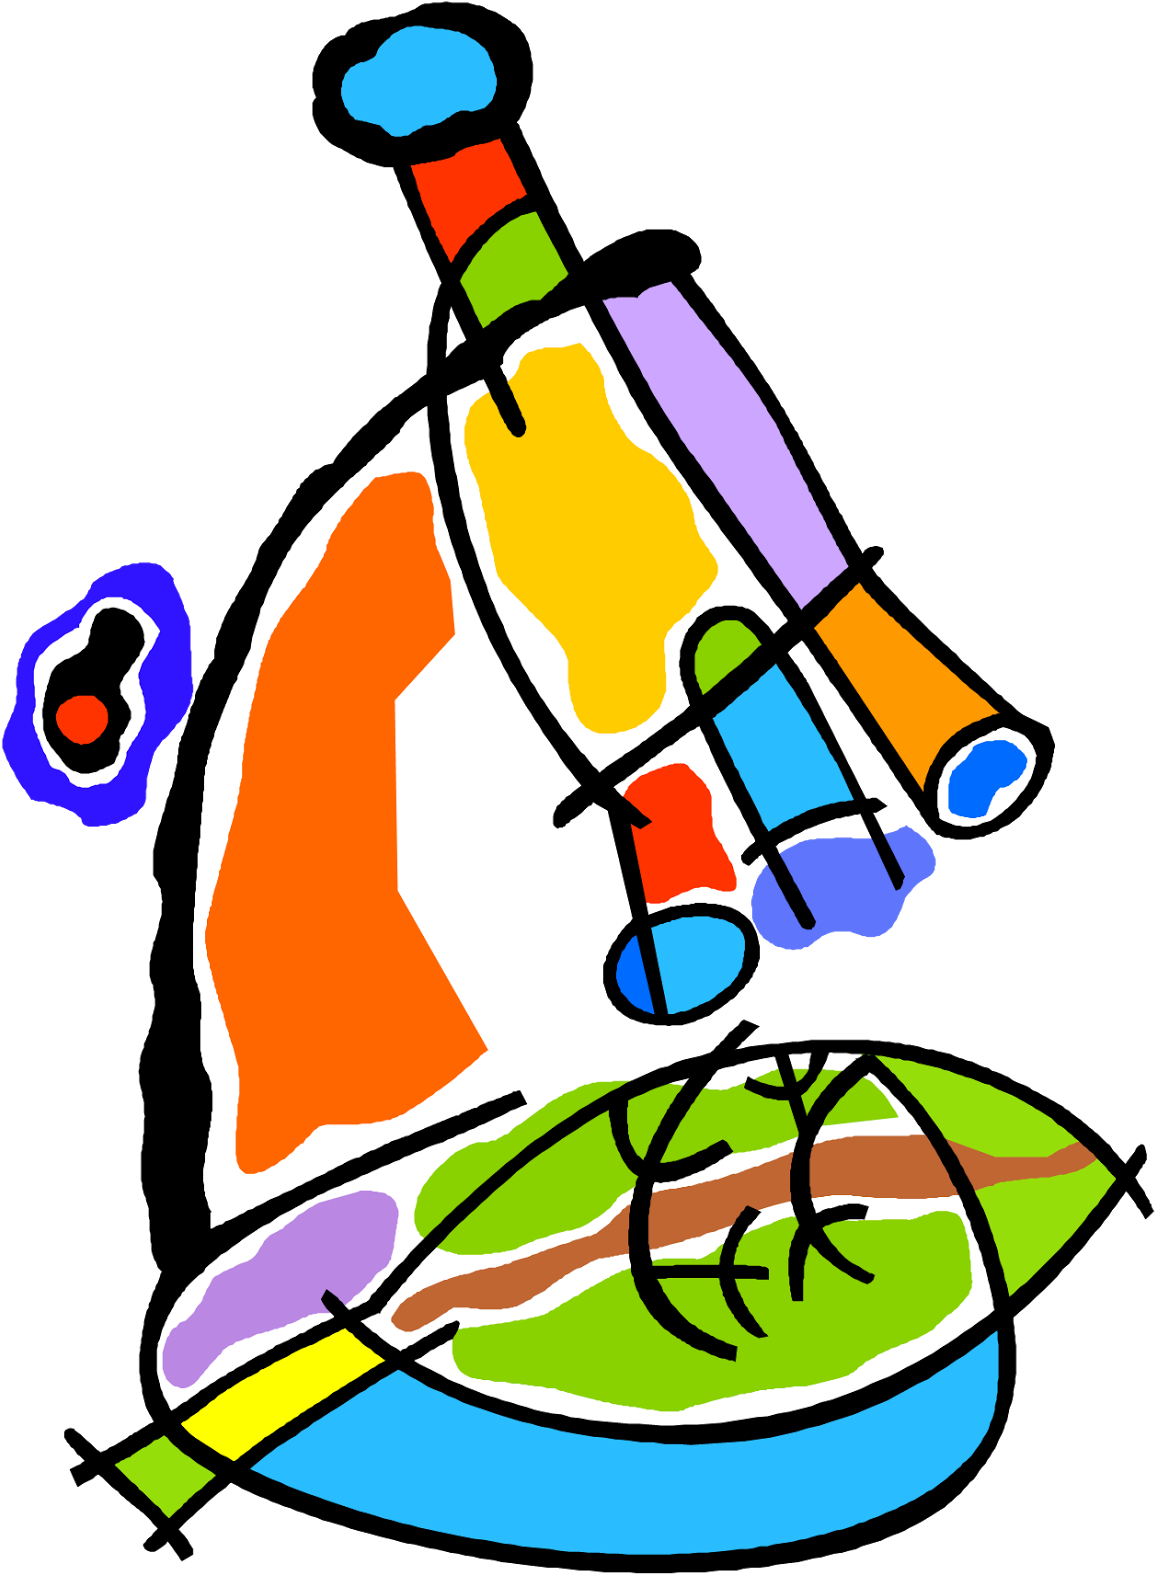 A Day Of Science At Driscoll Elementary School - Science Clip Art (1169x1600)